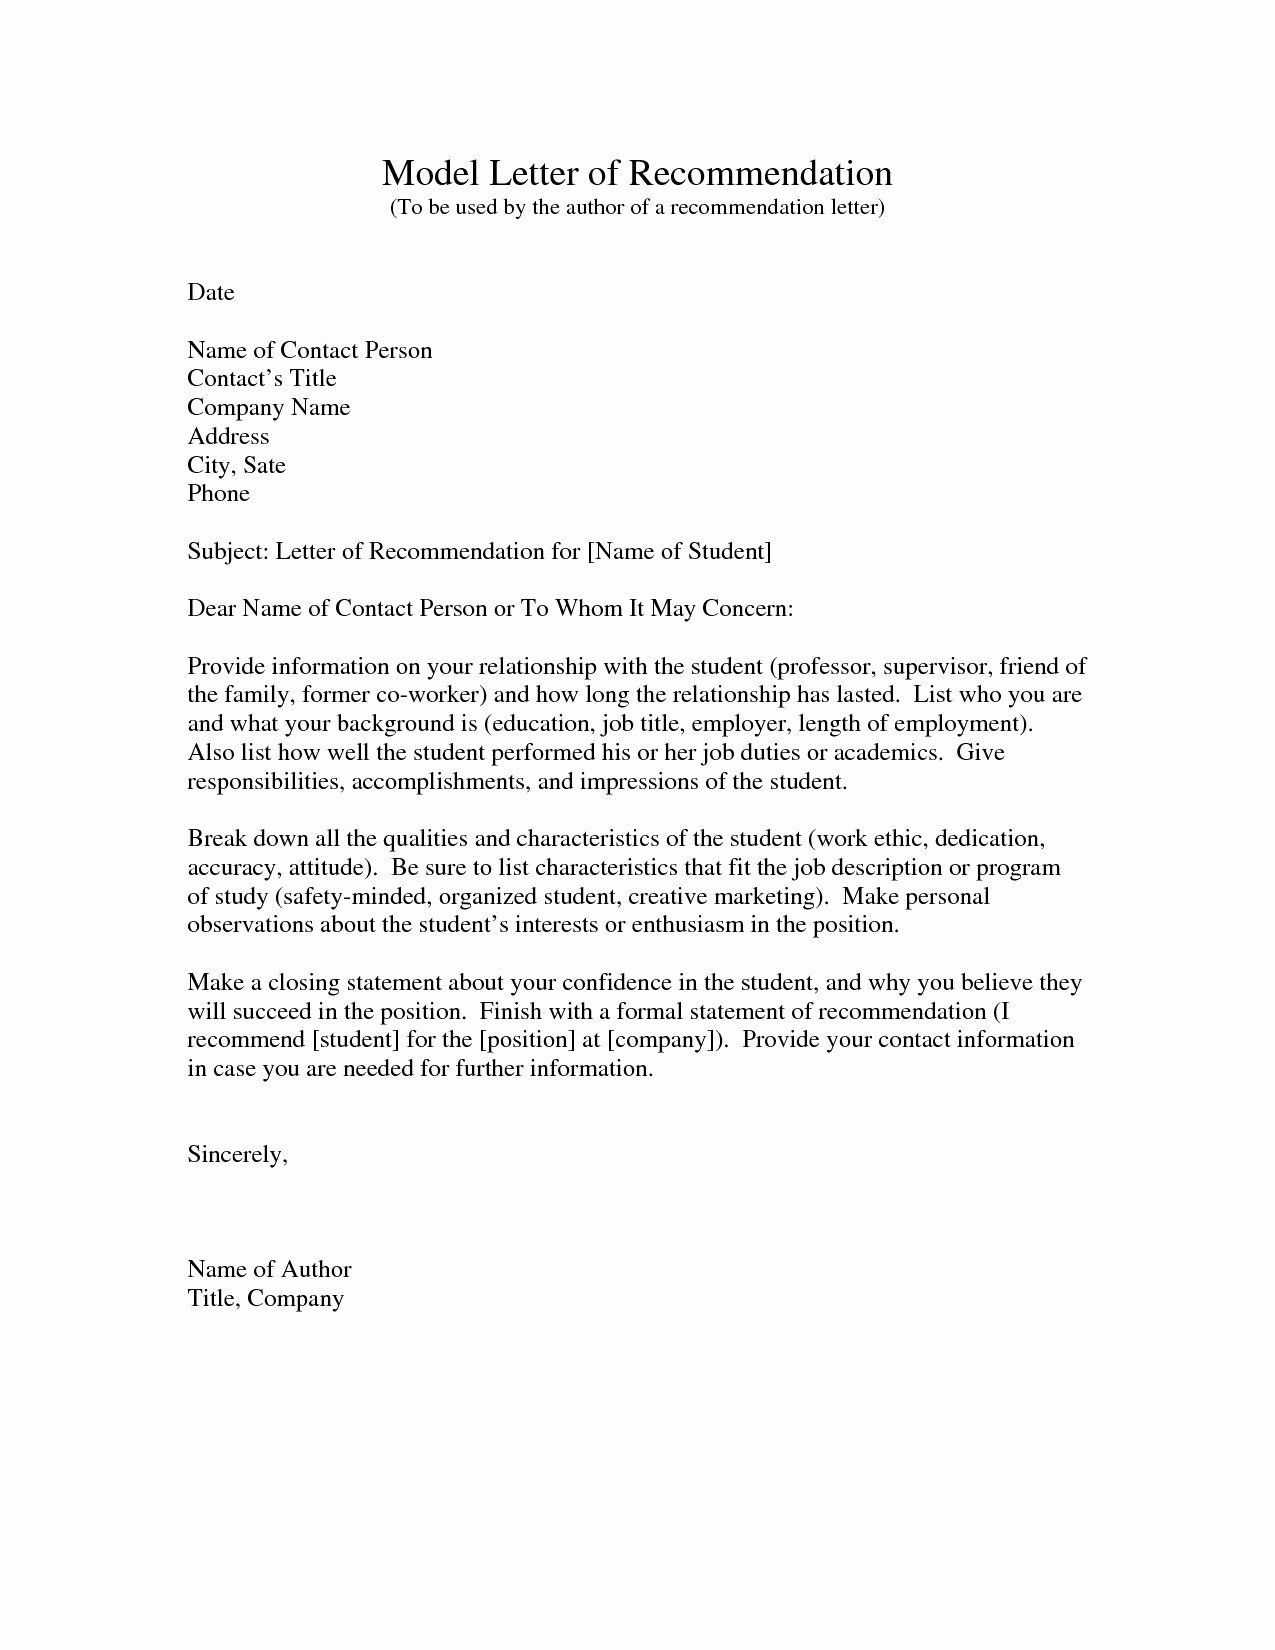 40 Letters Of Recommendation Template Letter Of with regard to dimensions 1275 X 1650